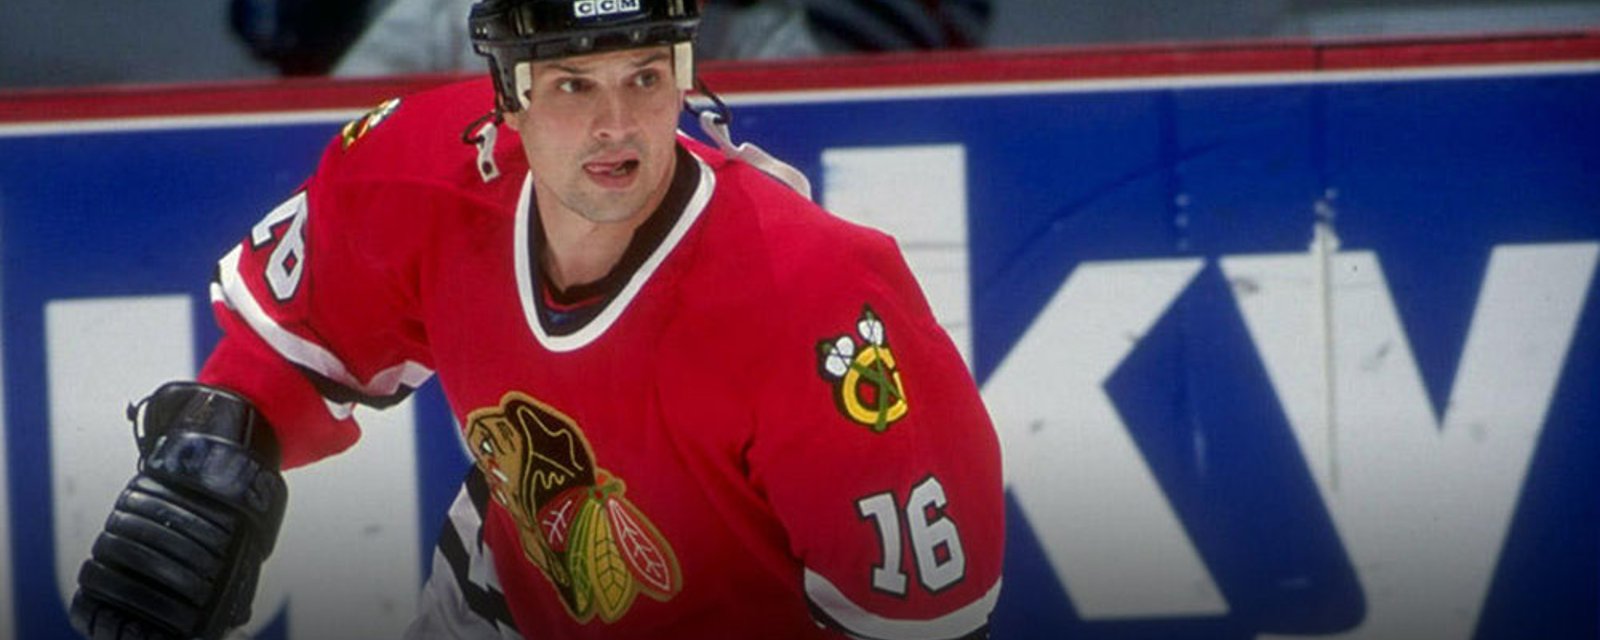 Son of former NHLer Olczyk opens up on father’s cancer diagnosis